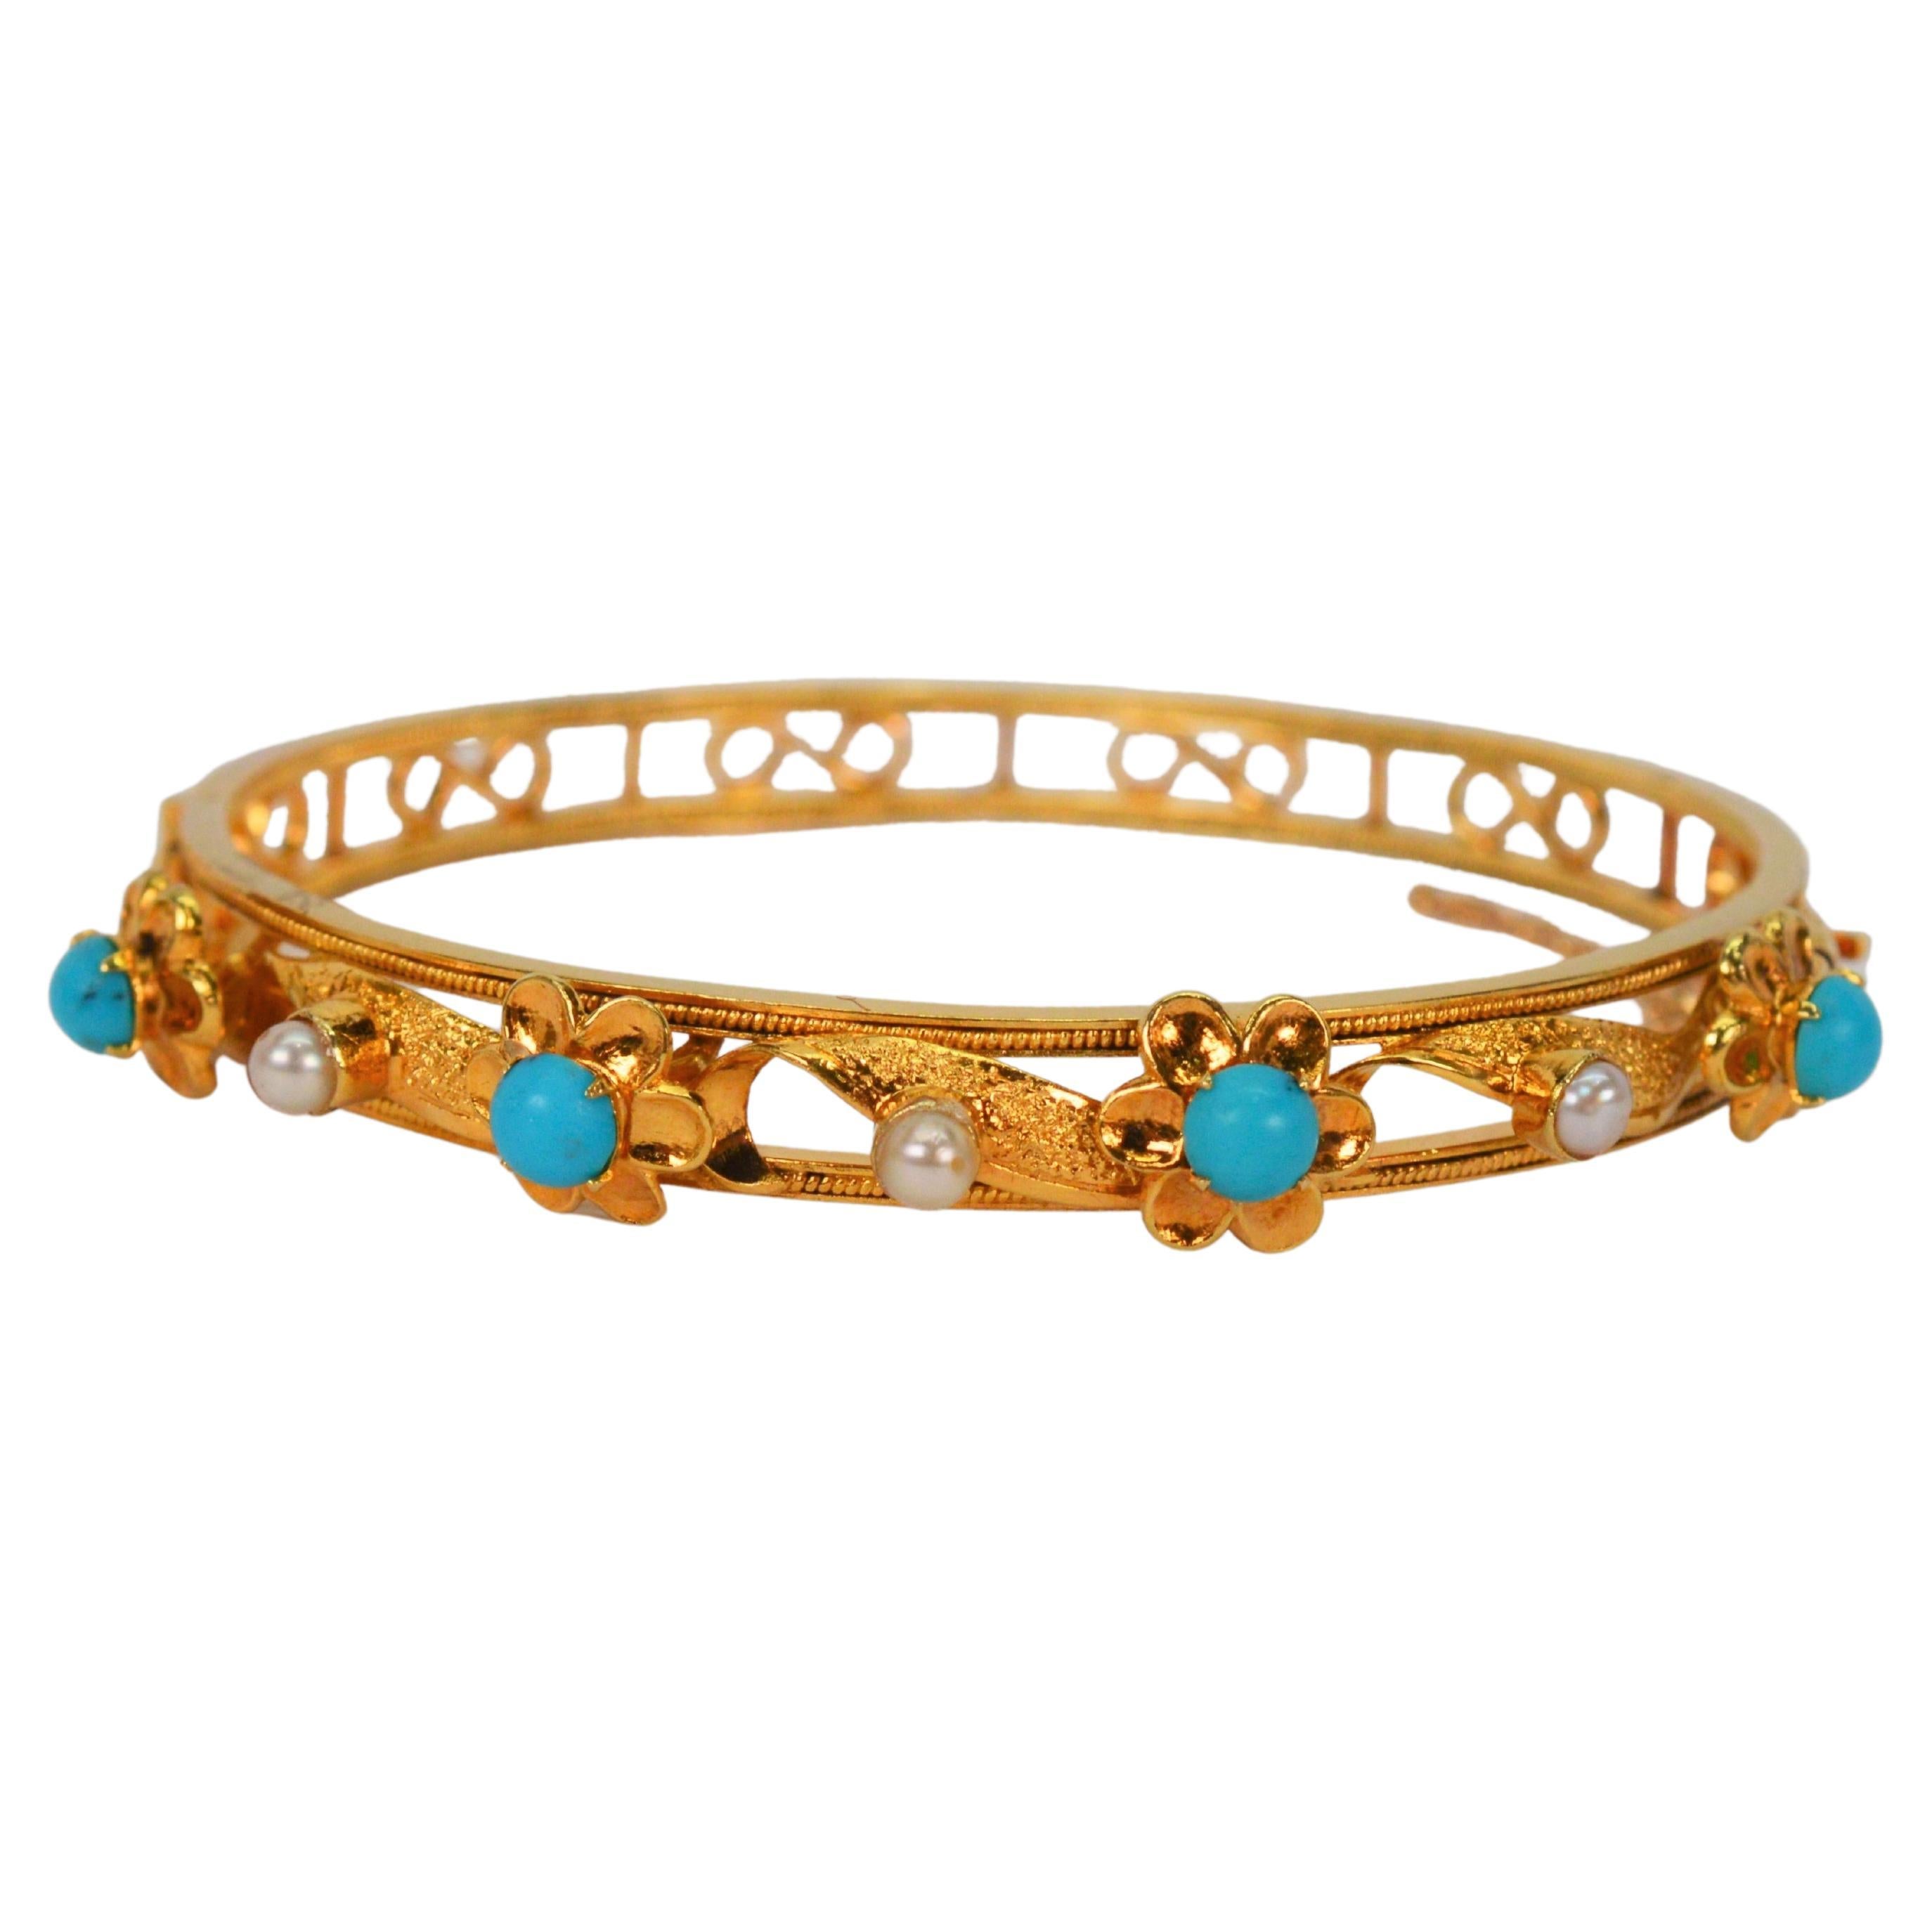 14 Karat Yellow Gold Filigree Bangle Bracelet with Turquoise and Pearl Accents